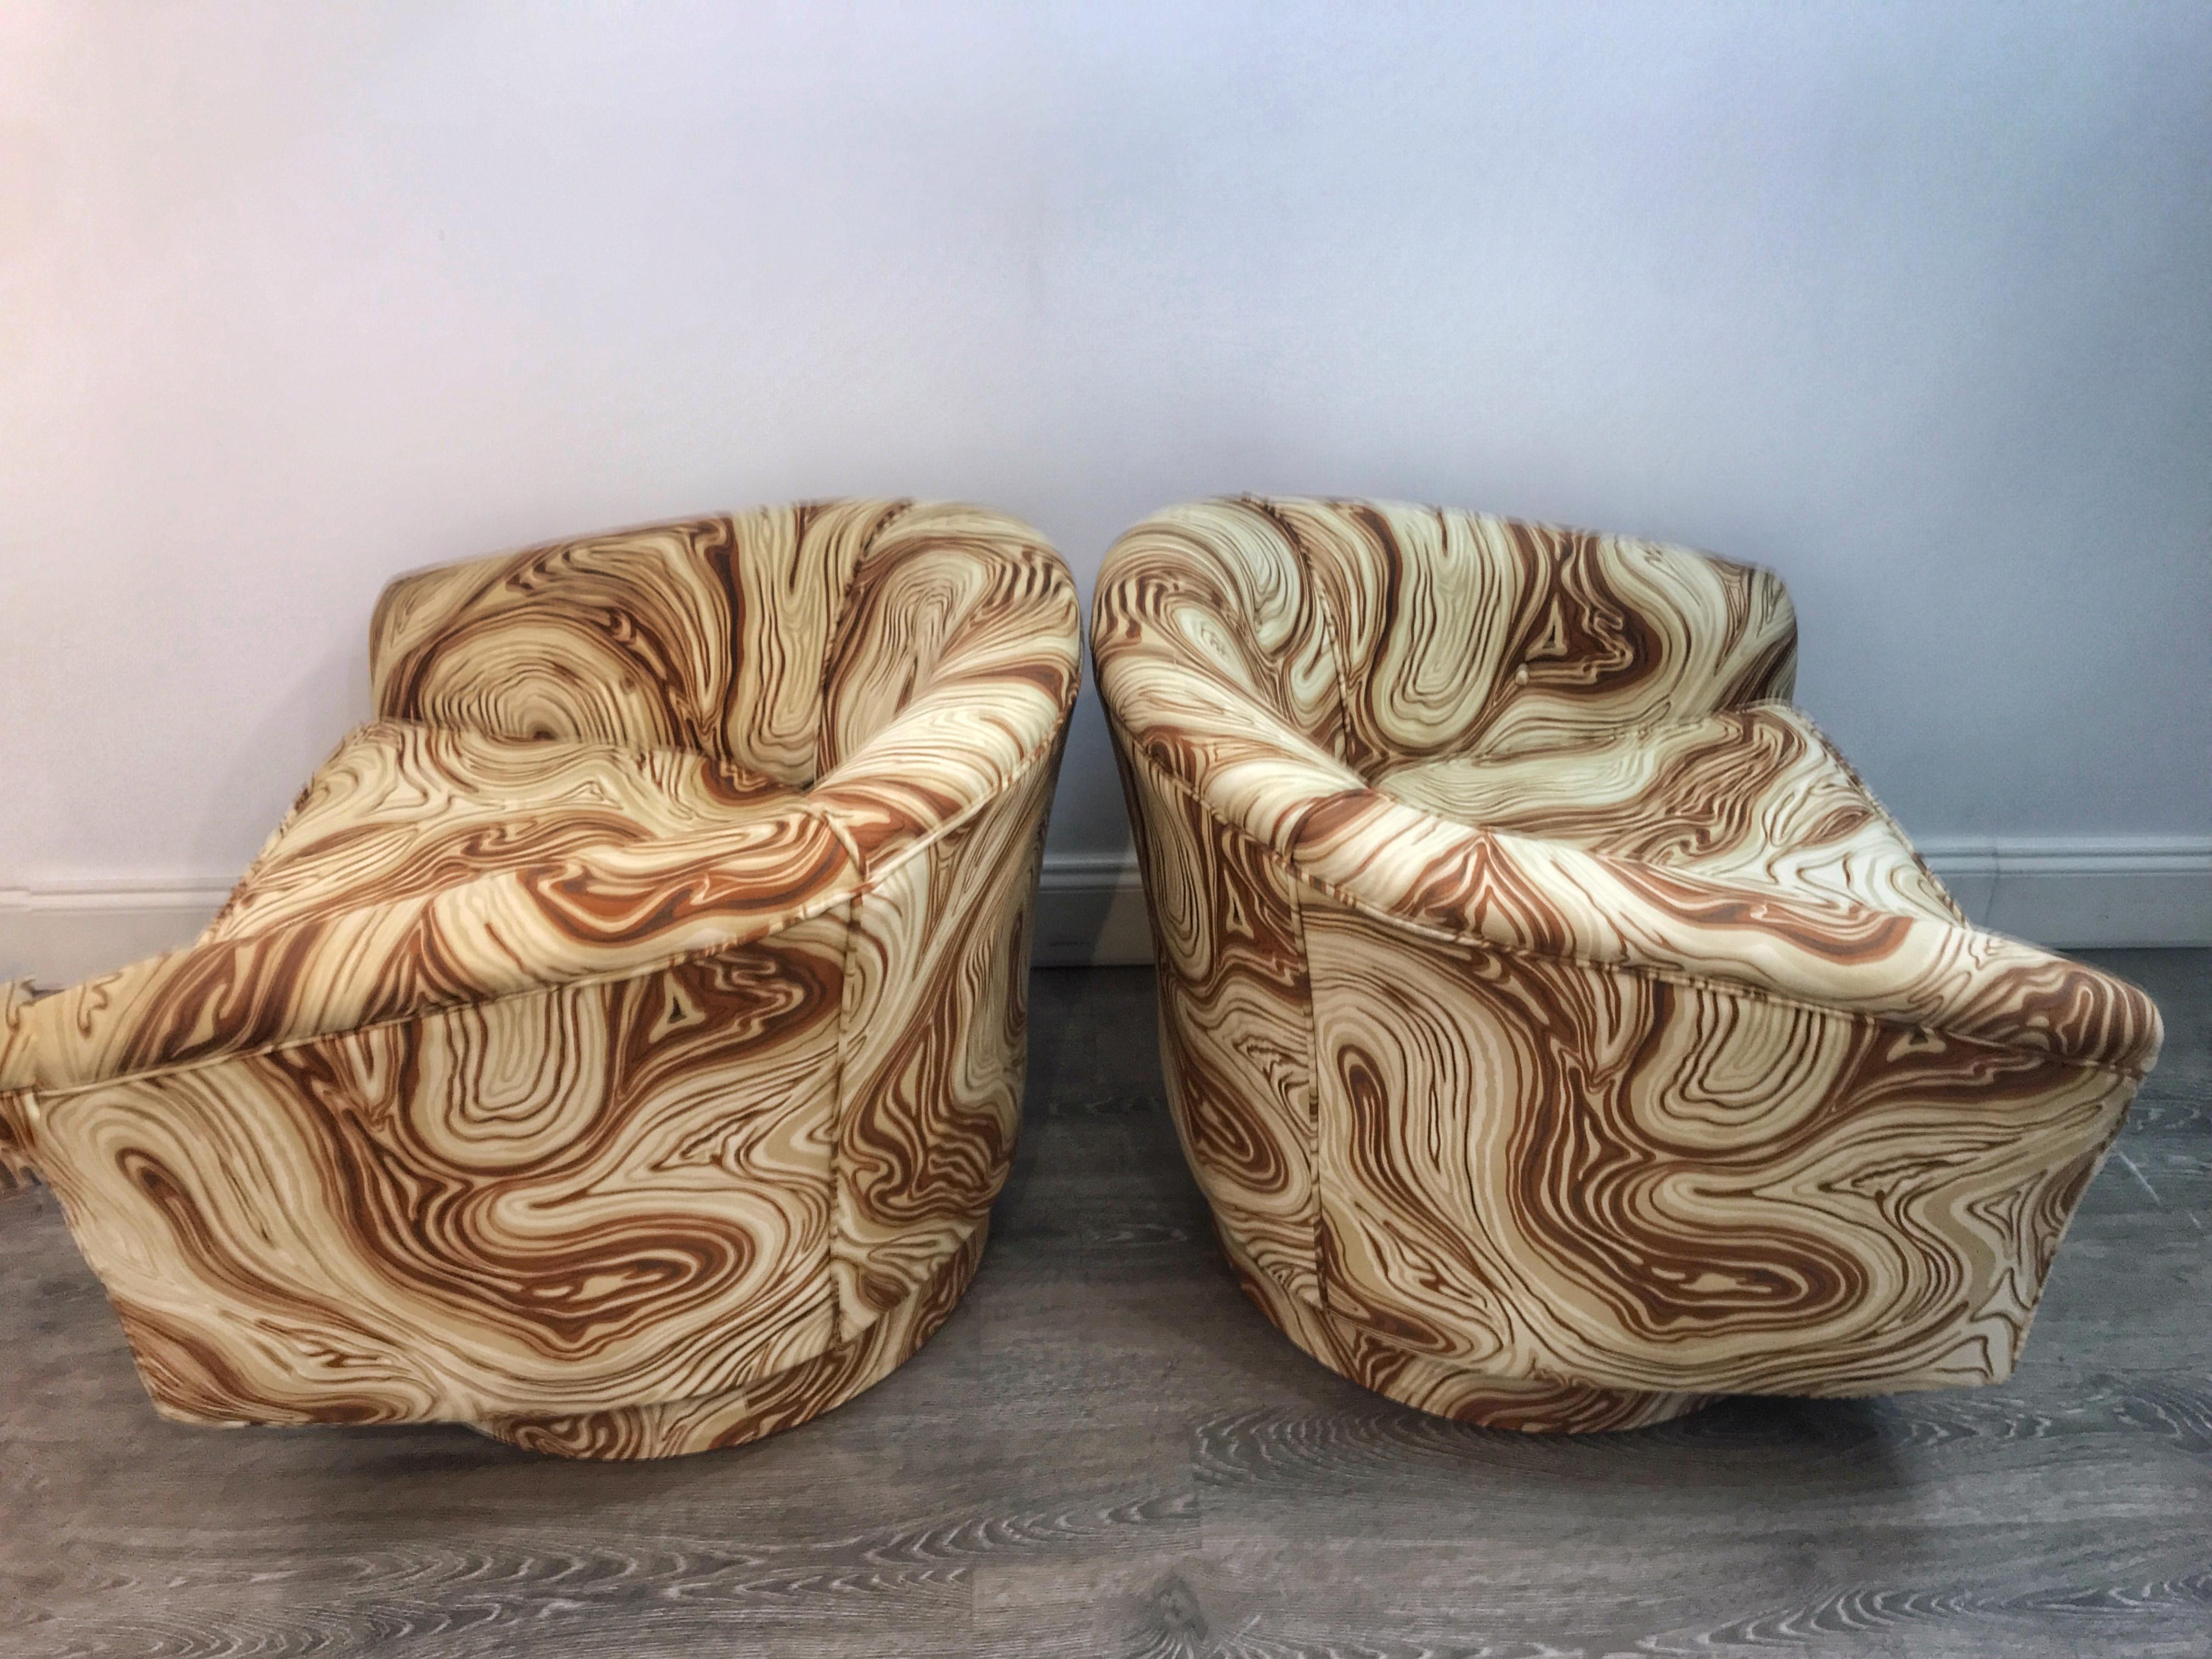 Pair of Sheik Milo Baughman style swivel chairs with custom marbleized upholstery, upholstery is in excellent condition and appears to be recent. Presents beautifully.